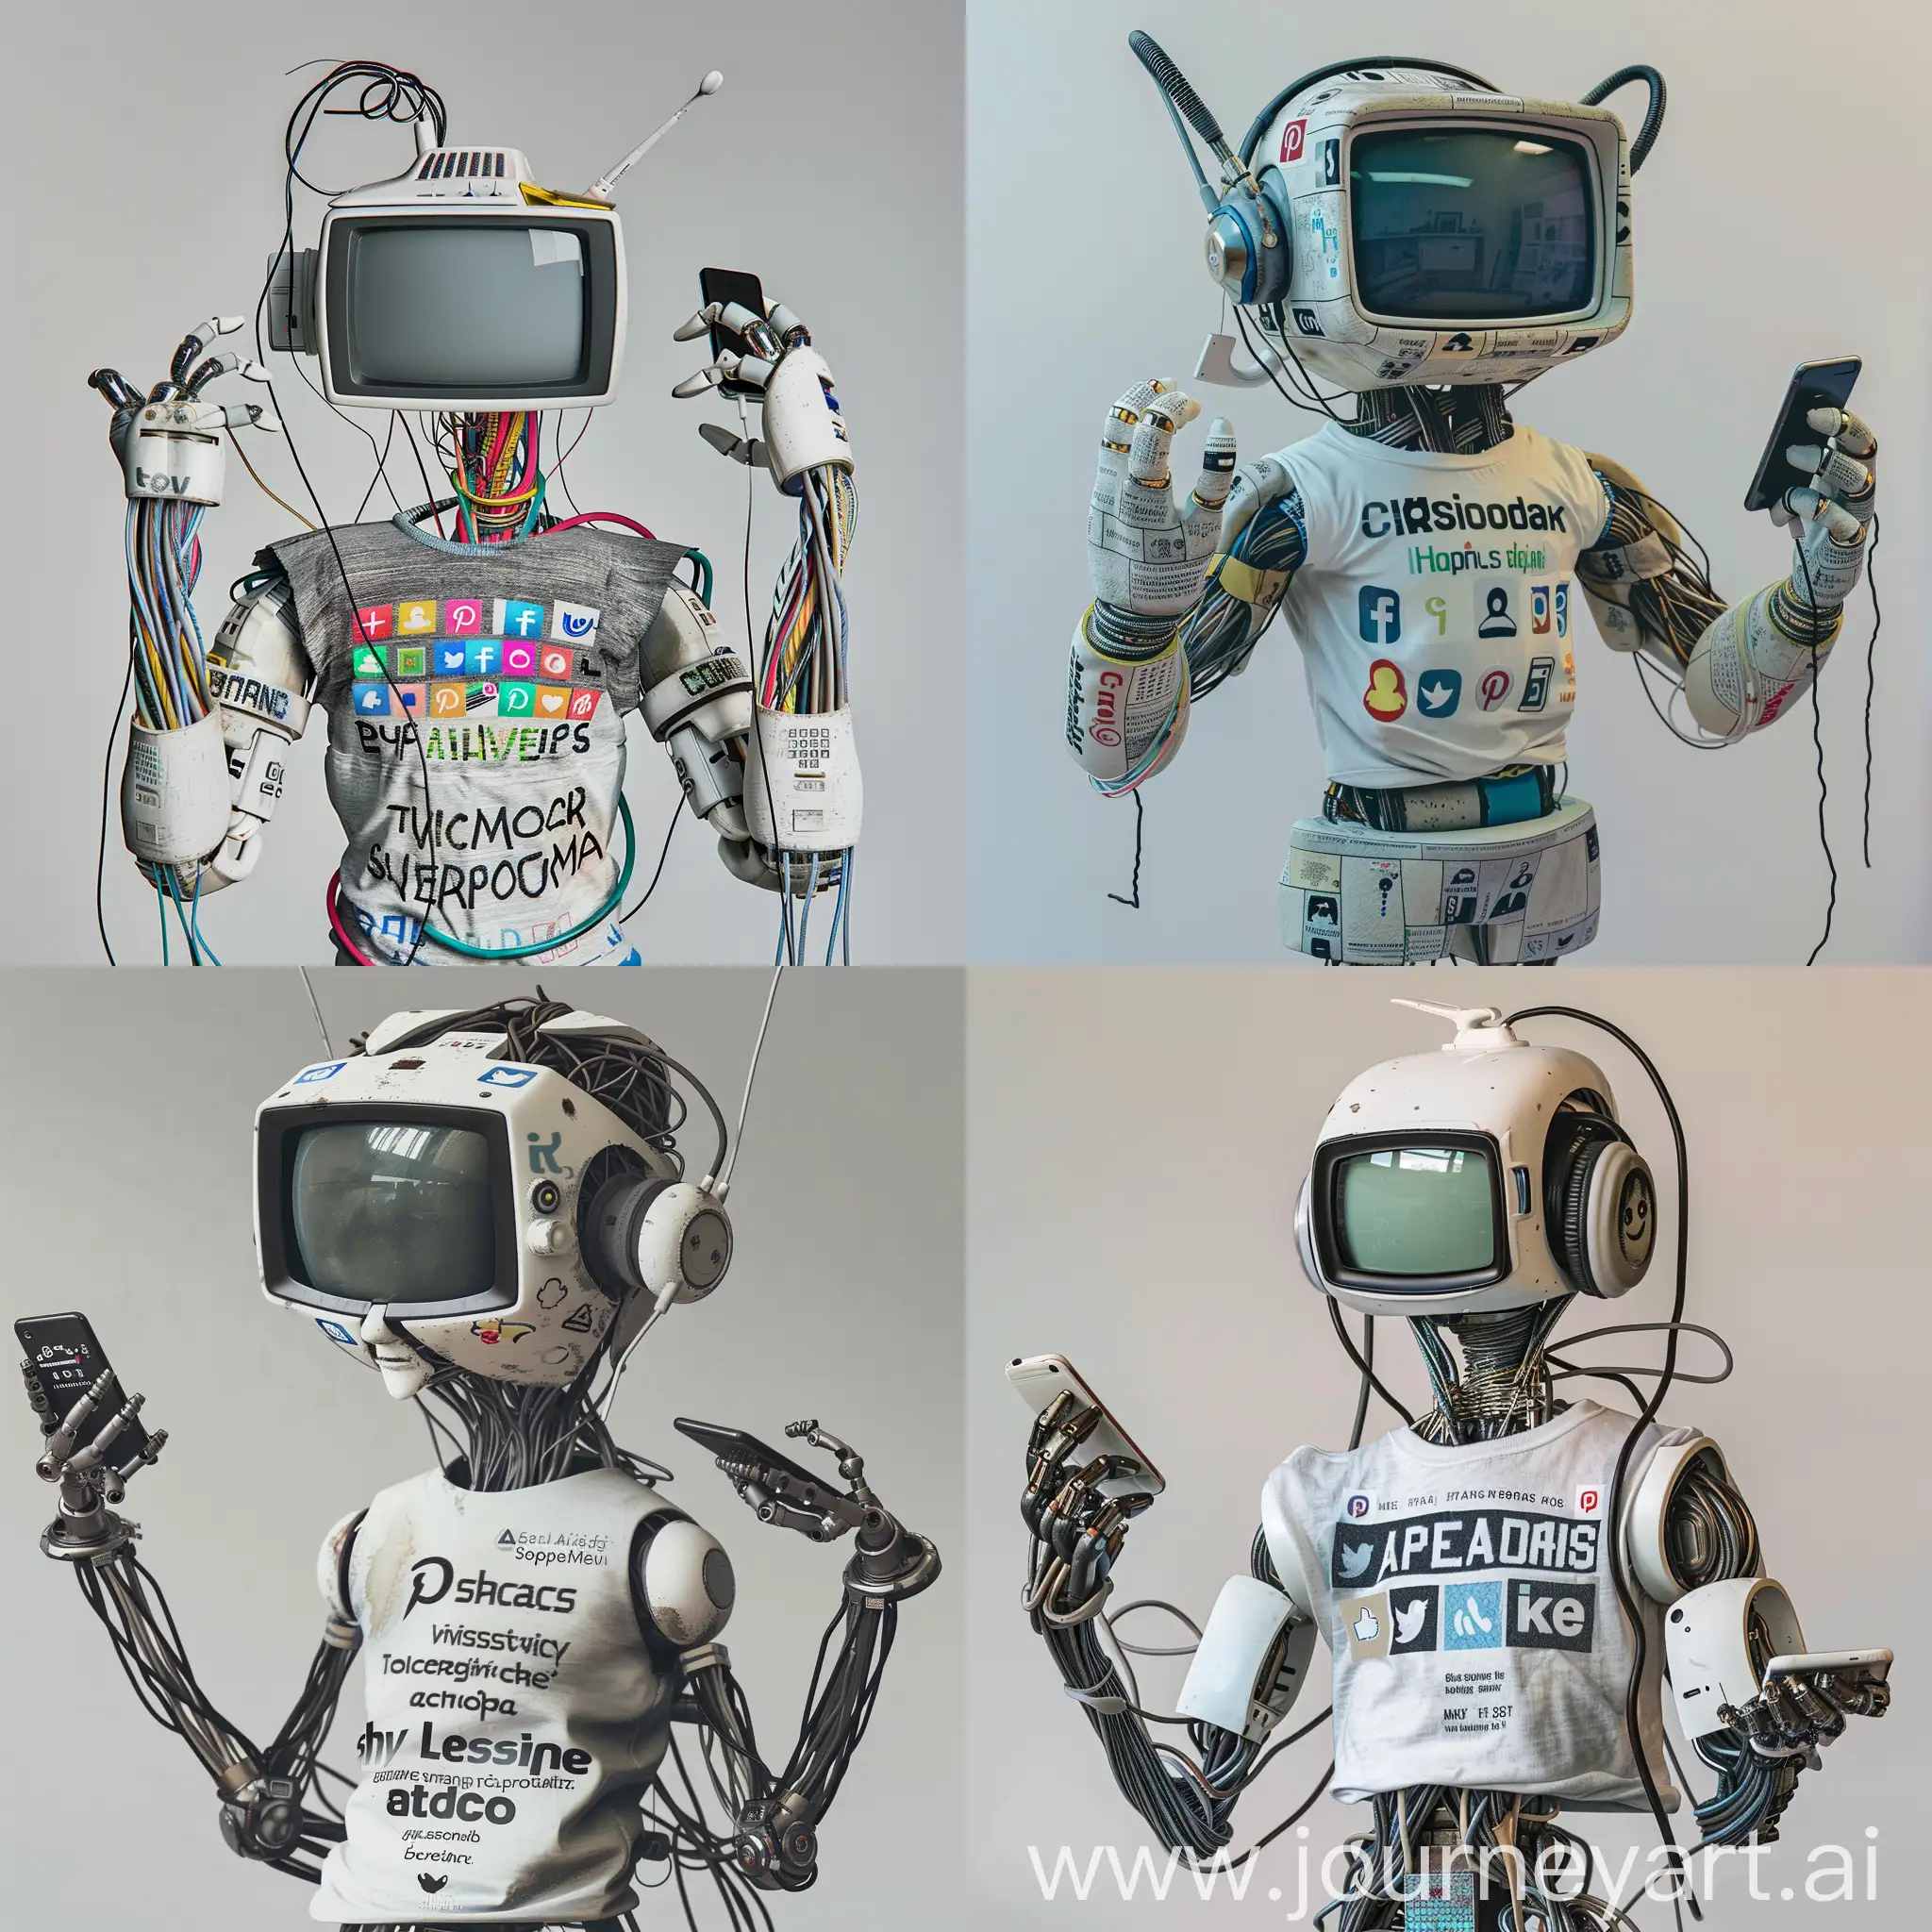 There is a robot with a television on its face. This person's hands are shaped like a telephone. Its arms are made of cable. The names of social media applications are written on the t-shirt he wears. The robot is texting someone with a phone in his hand and has headphones in his ear.